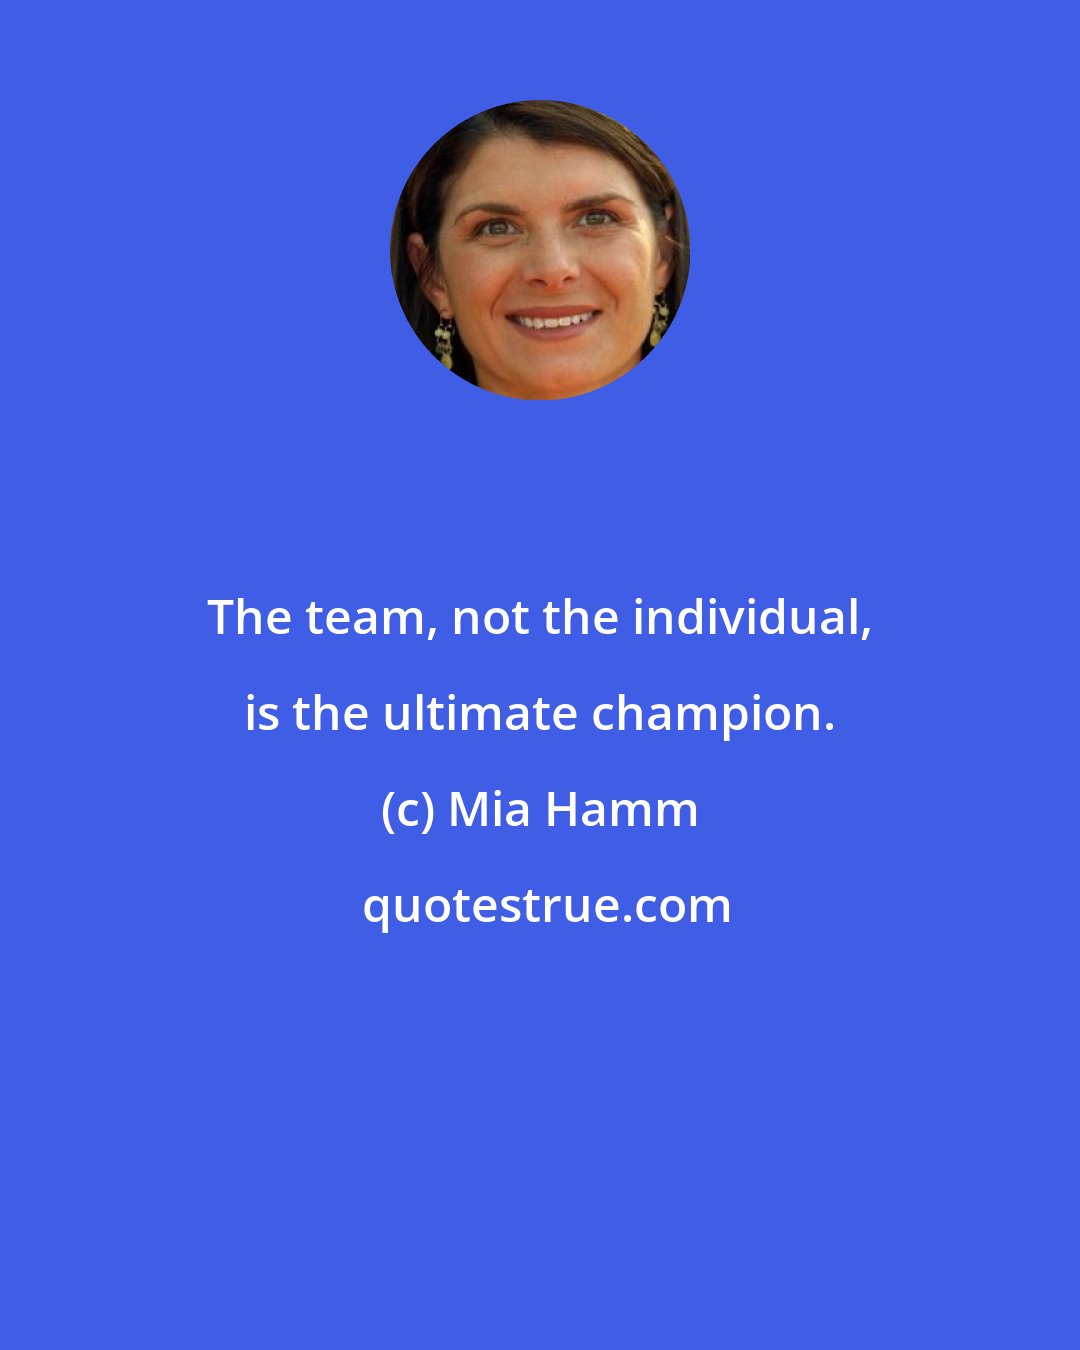 Mia Hamm: The team, not the individual, is the ultimate champion.